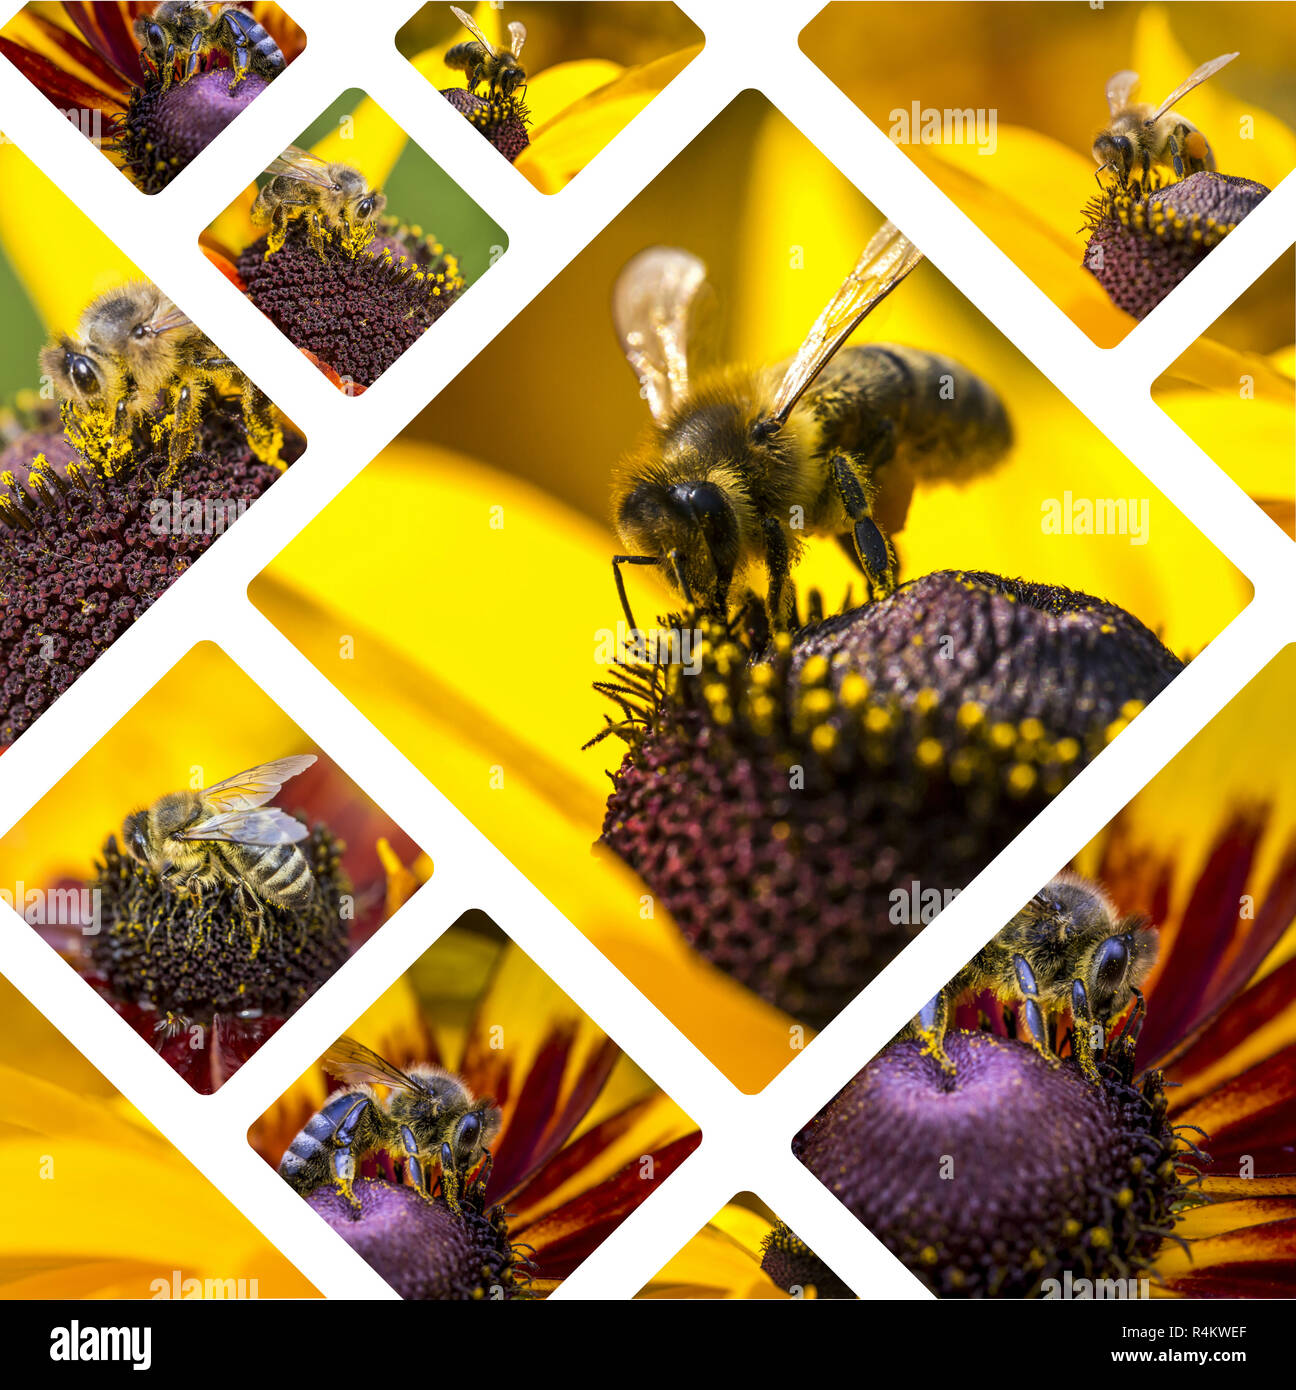 Collage of Western Honey Bee images - travel background (my photos) Stock Photo